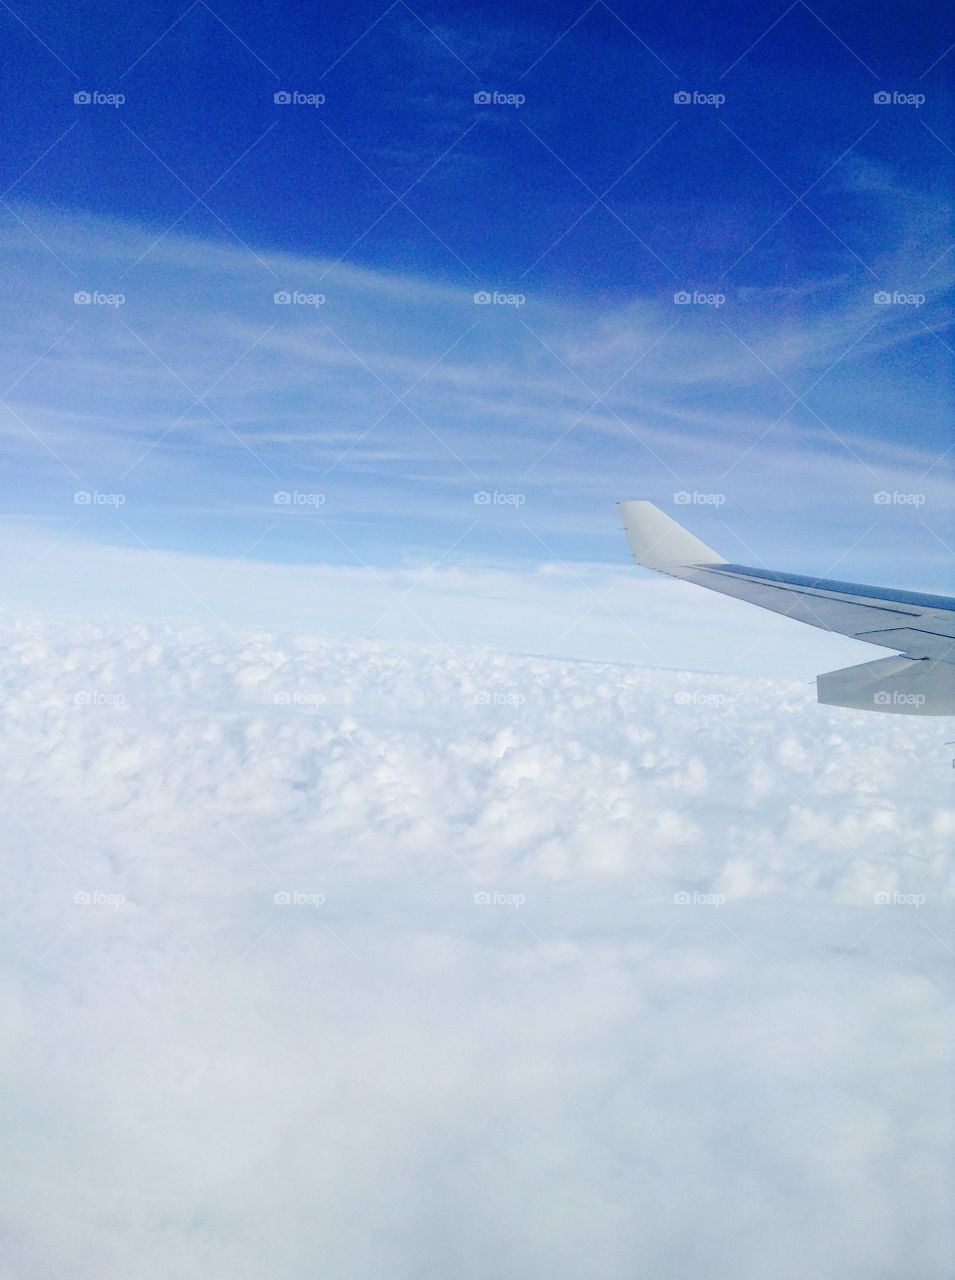 Flying . From airplane sky so amazing that make believe god exist so perfect and peacefull 